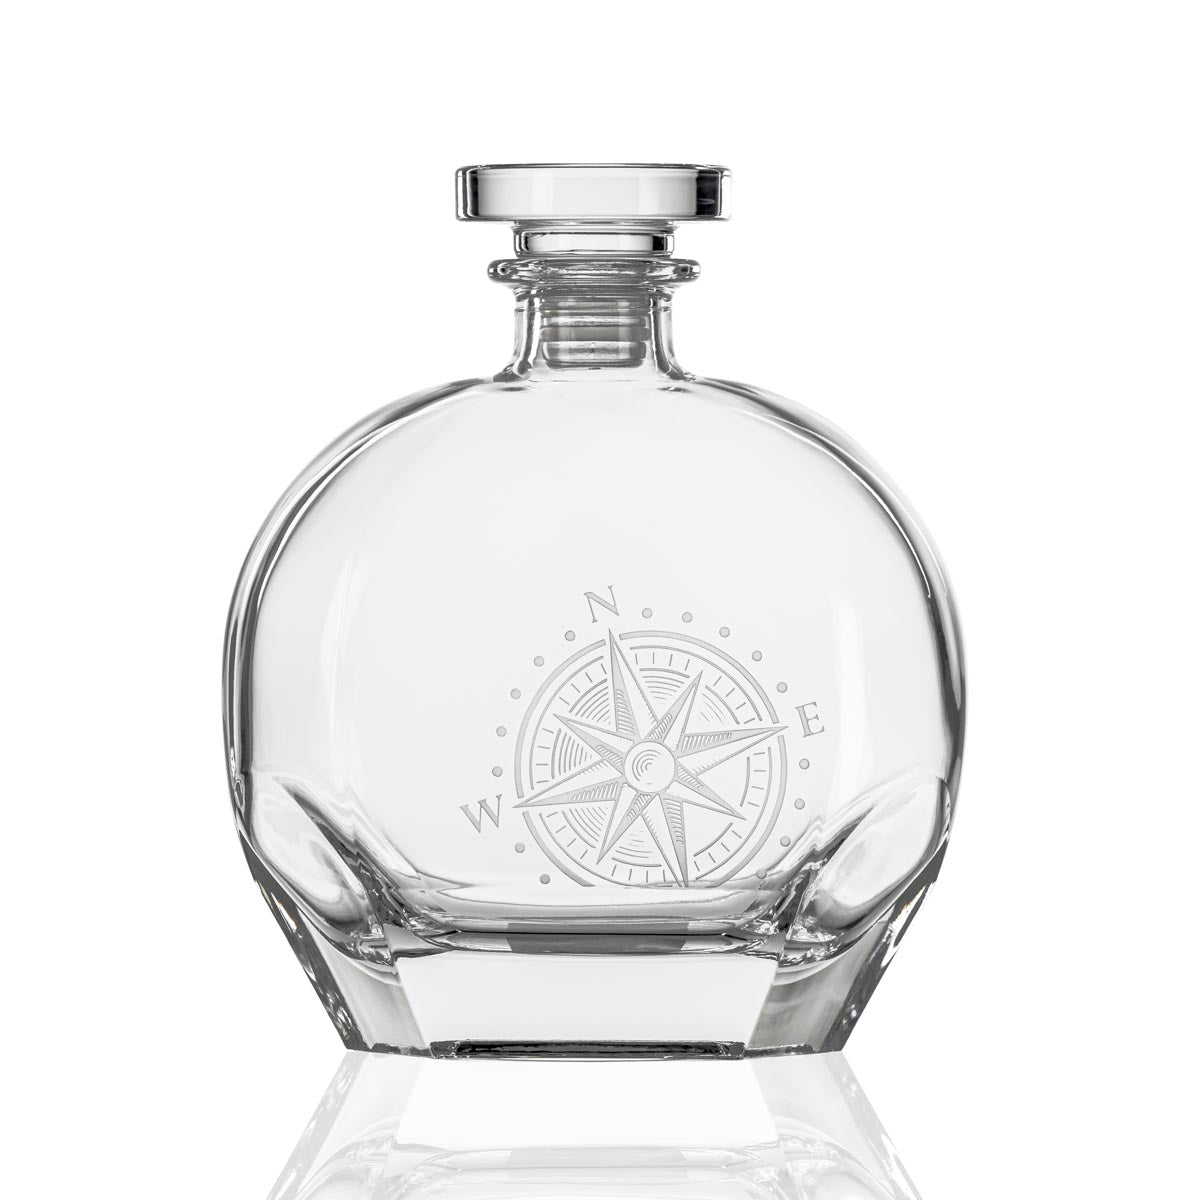 Compass Star Whiskey Decanter 3 Piece Set-Nautical Decor and Gifts